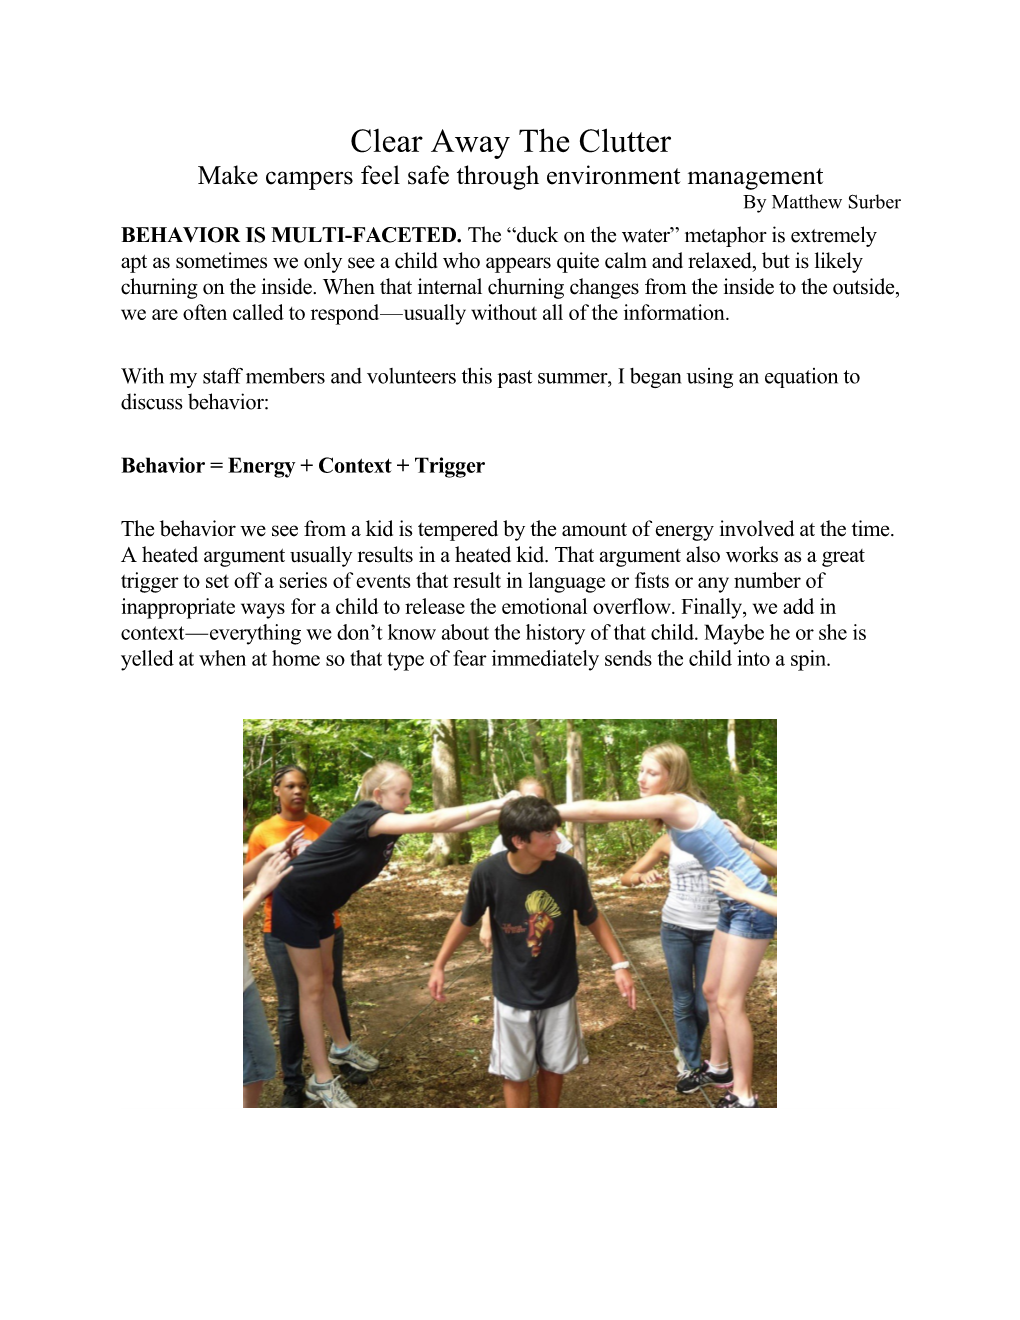 Make Campers Feel Safe Through Environment Management